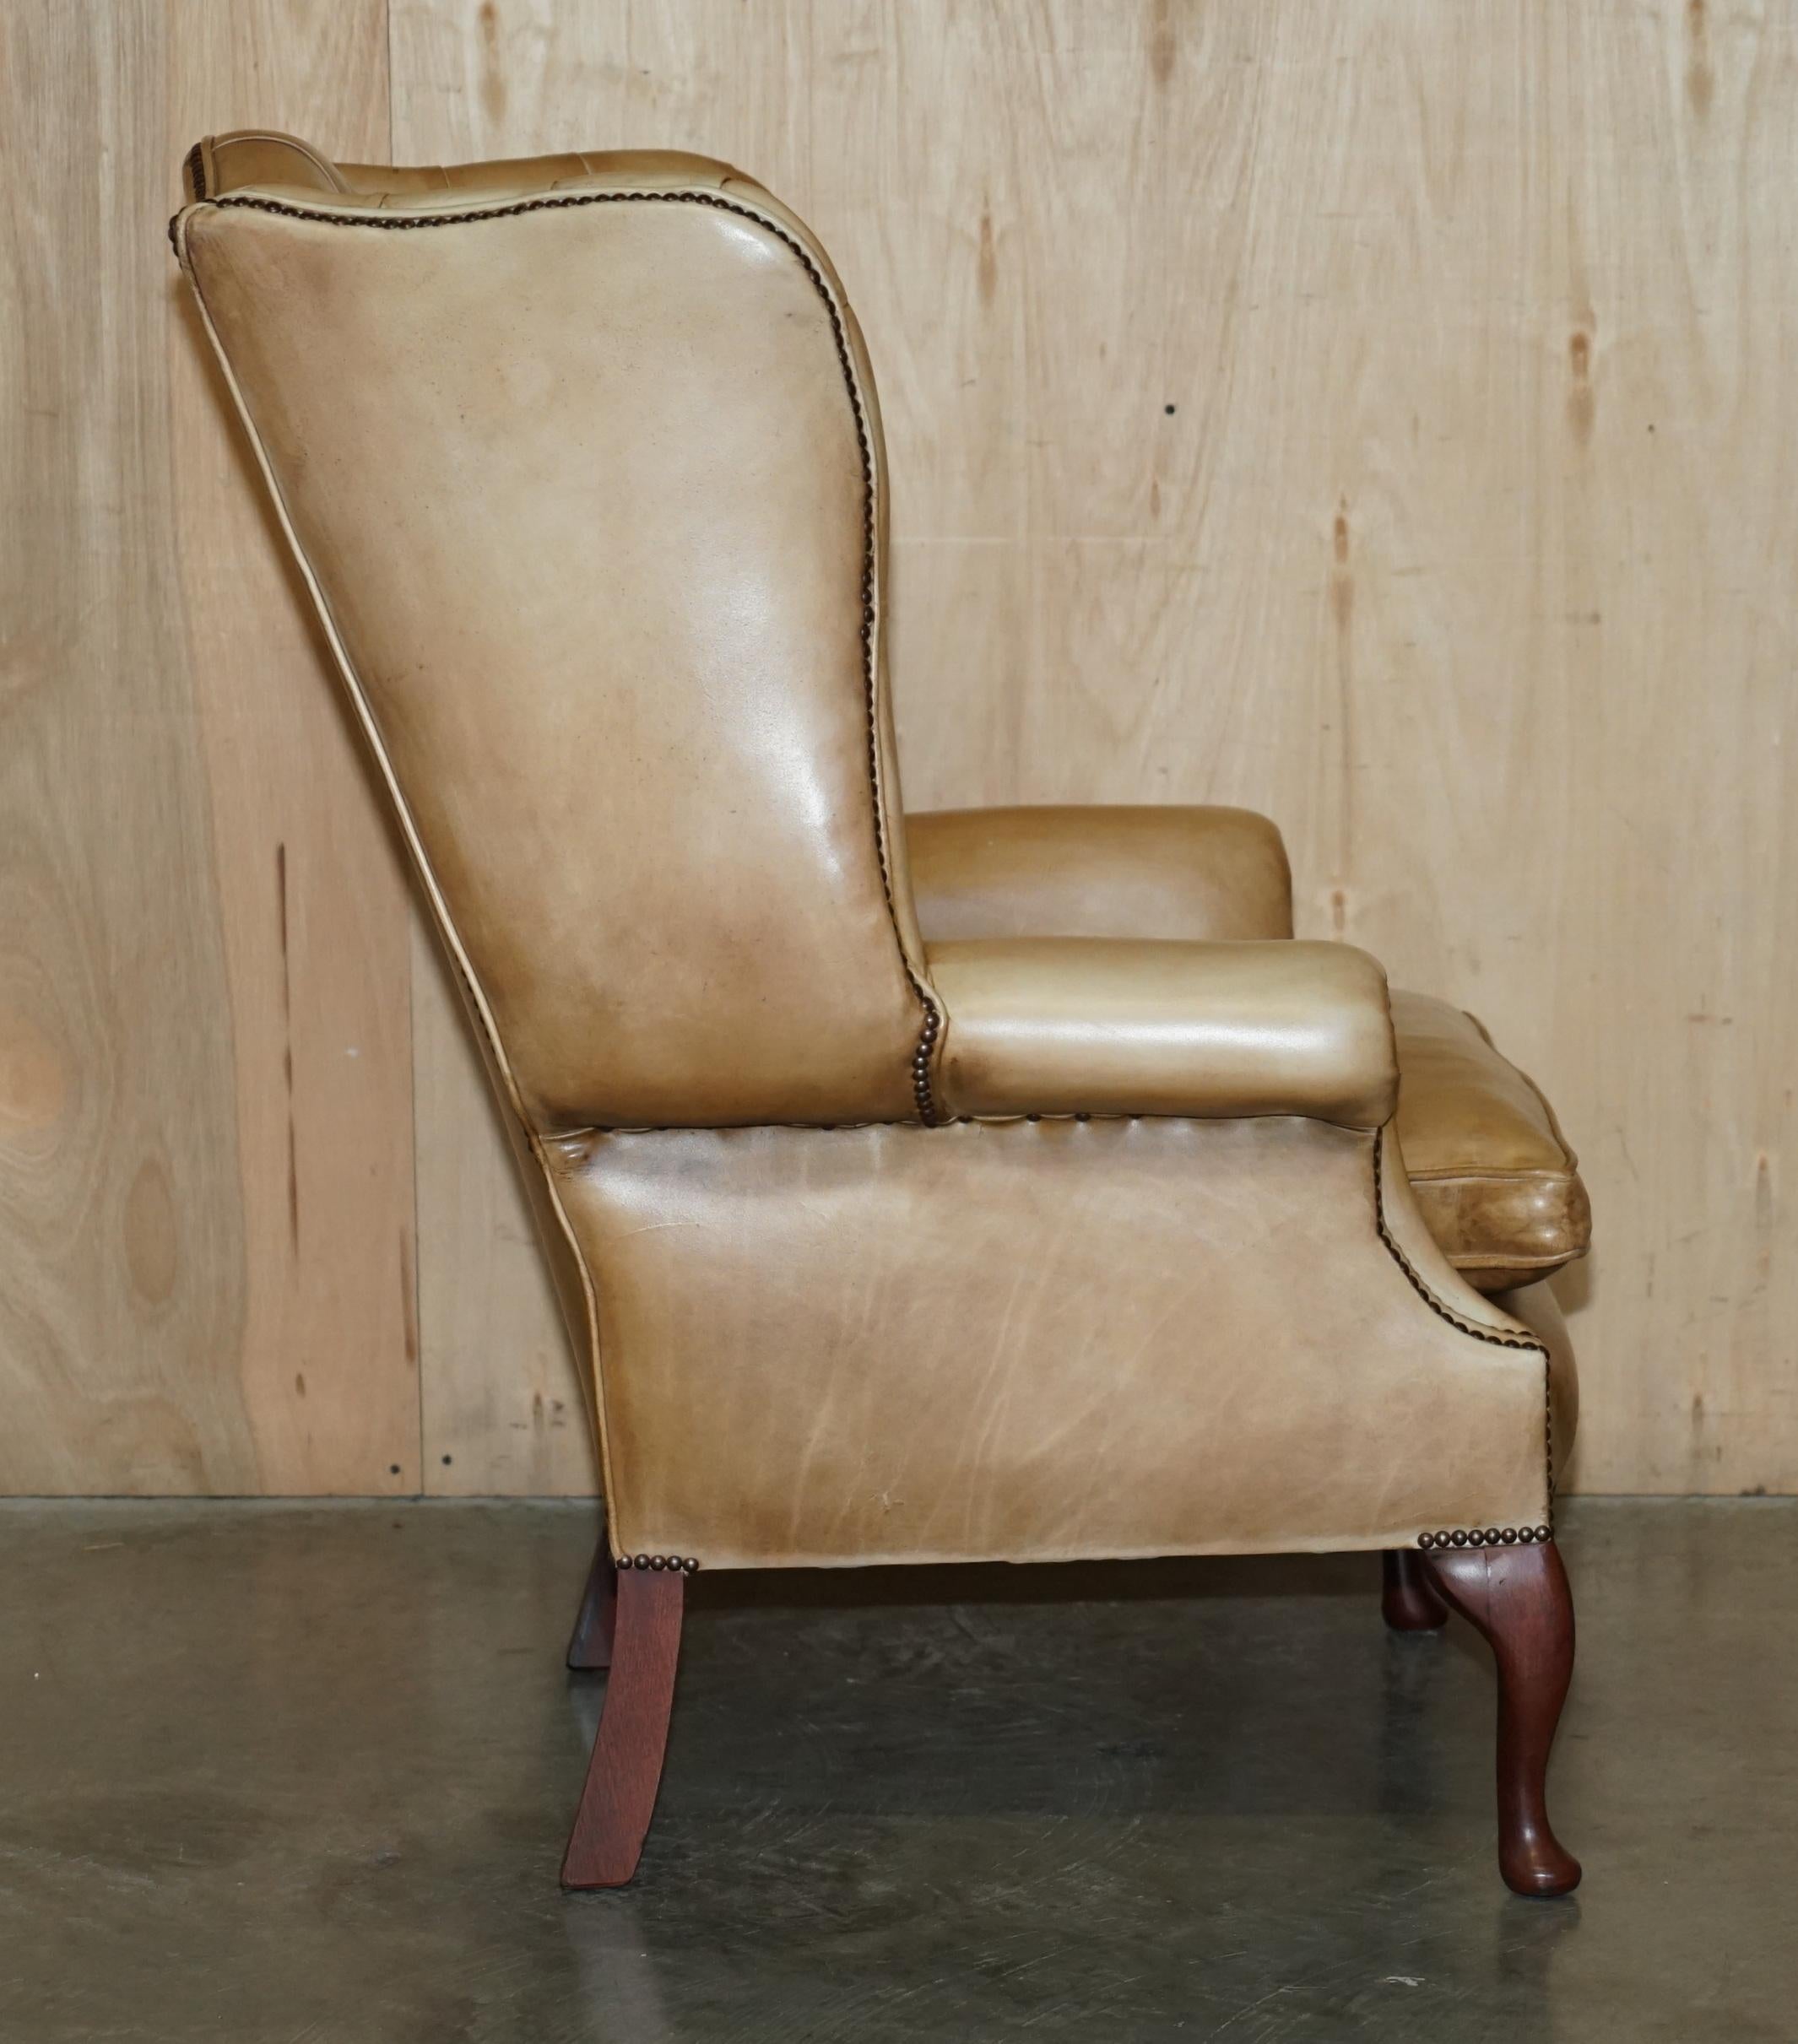 PAIR OF VINTAGE Tan BROWN LEATHER CHESTERFiELD WINGBACK CHAIRS WITH FOOTSTOOLS im Angebot 2